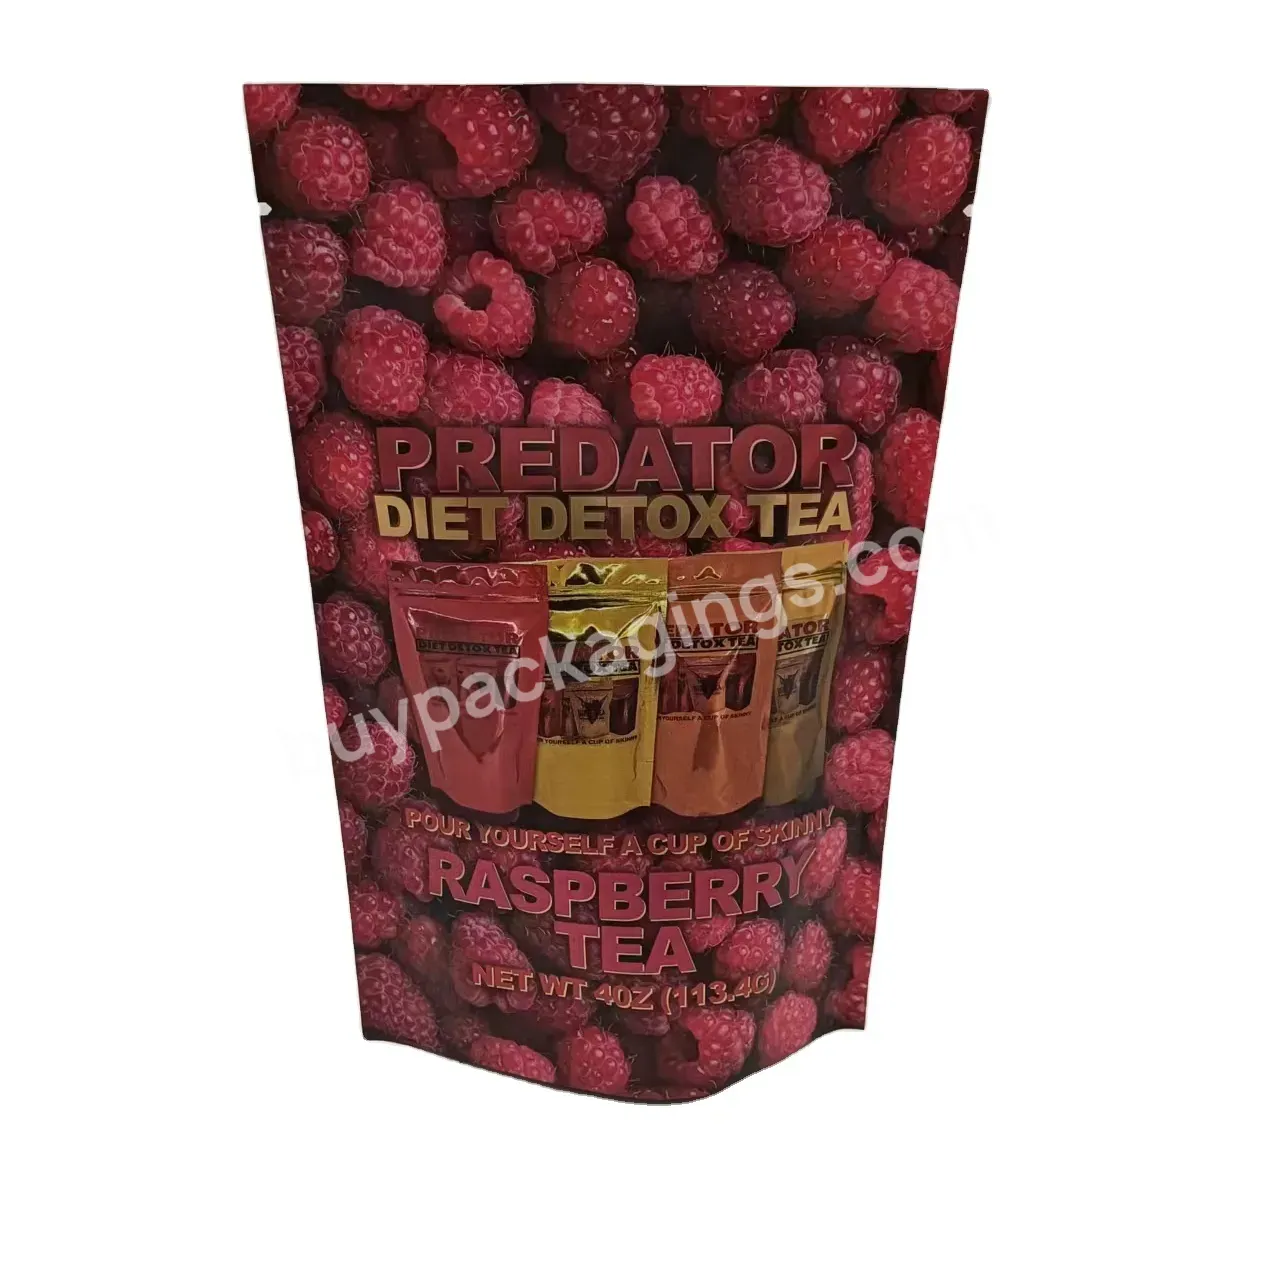 Edible Bags Shopping Packaging Bags Supplier Plastic China Customized Logo Industrial Snack Packaging - Buy Edible Bags,Customize Fanny Pack Cheap Fanny Packs,Snack Packaging.